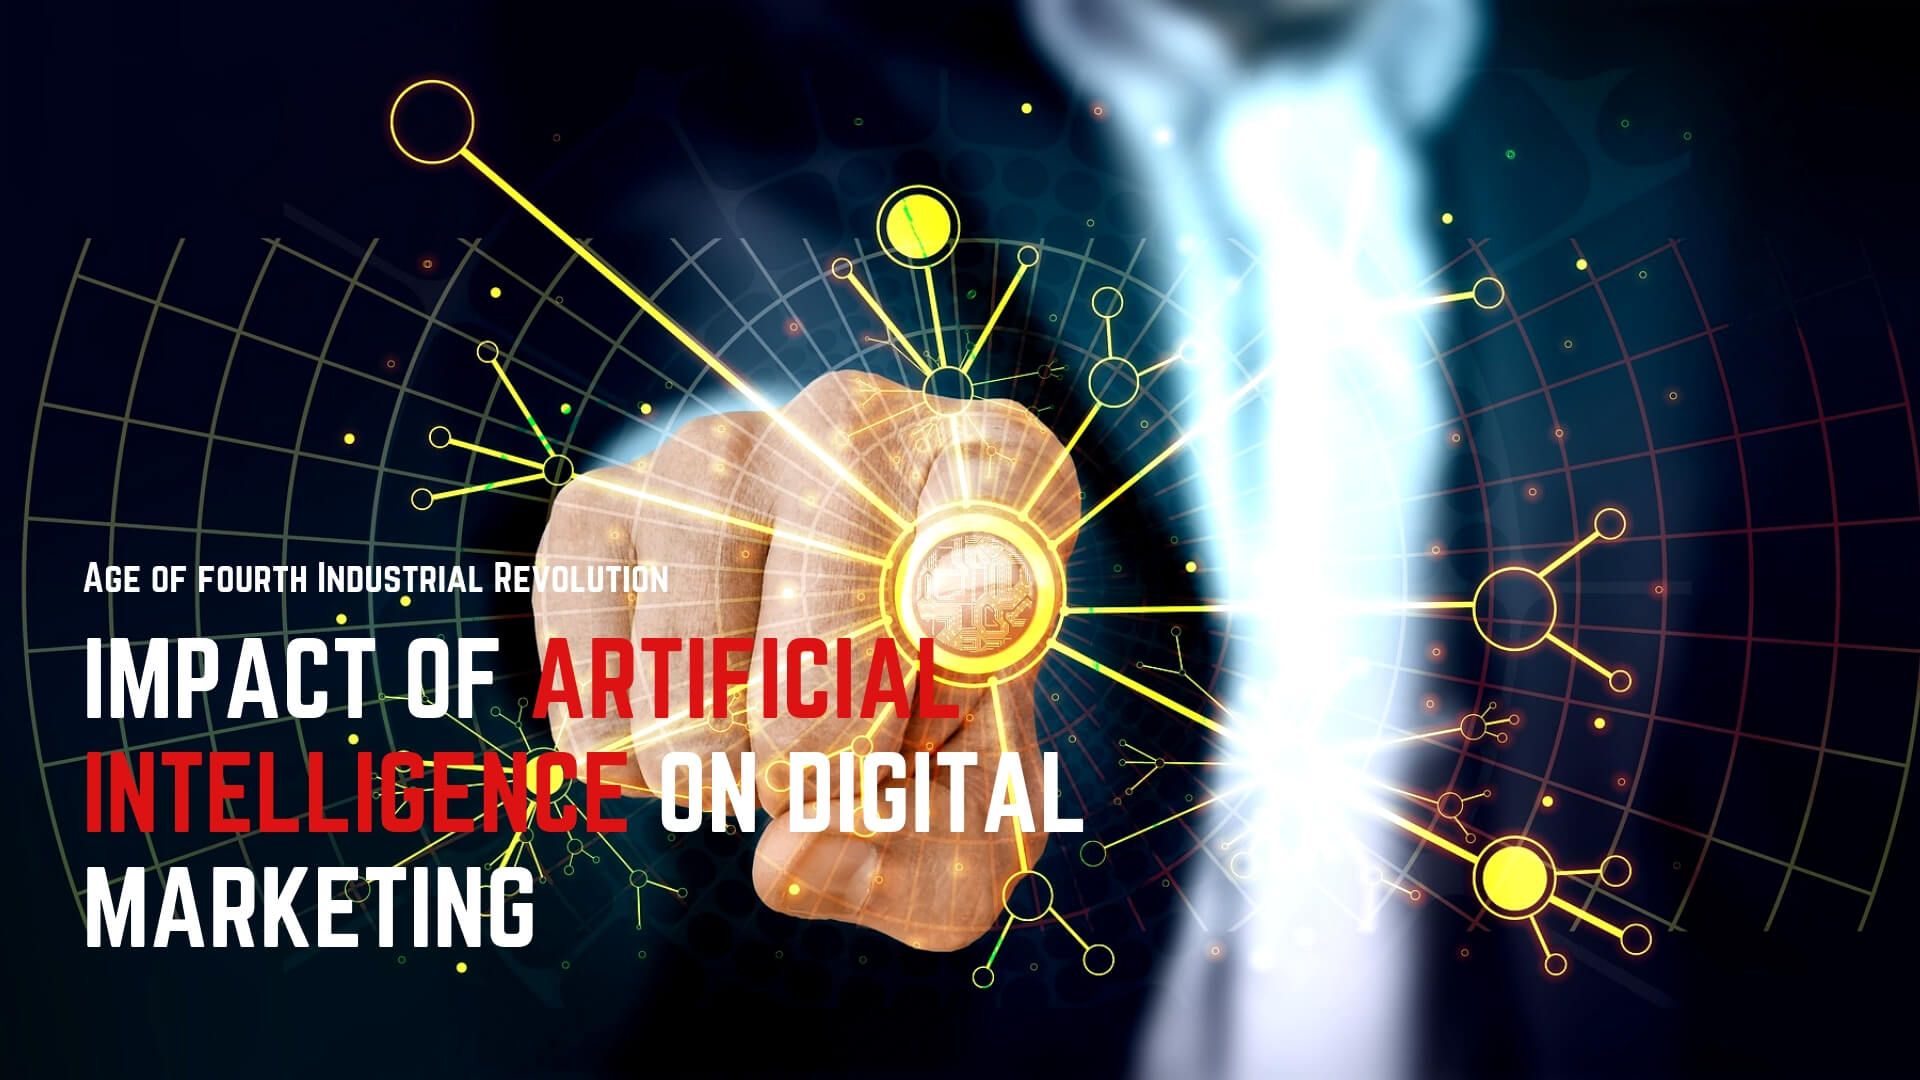 The Impact of Artificial Intelligence in Digital Marketing